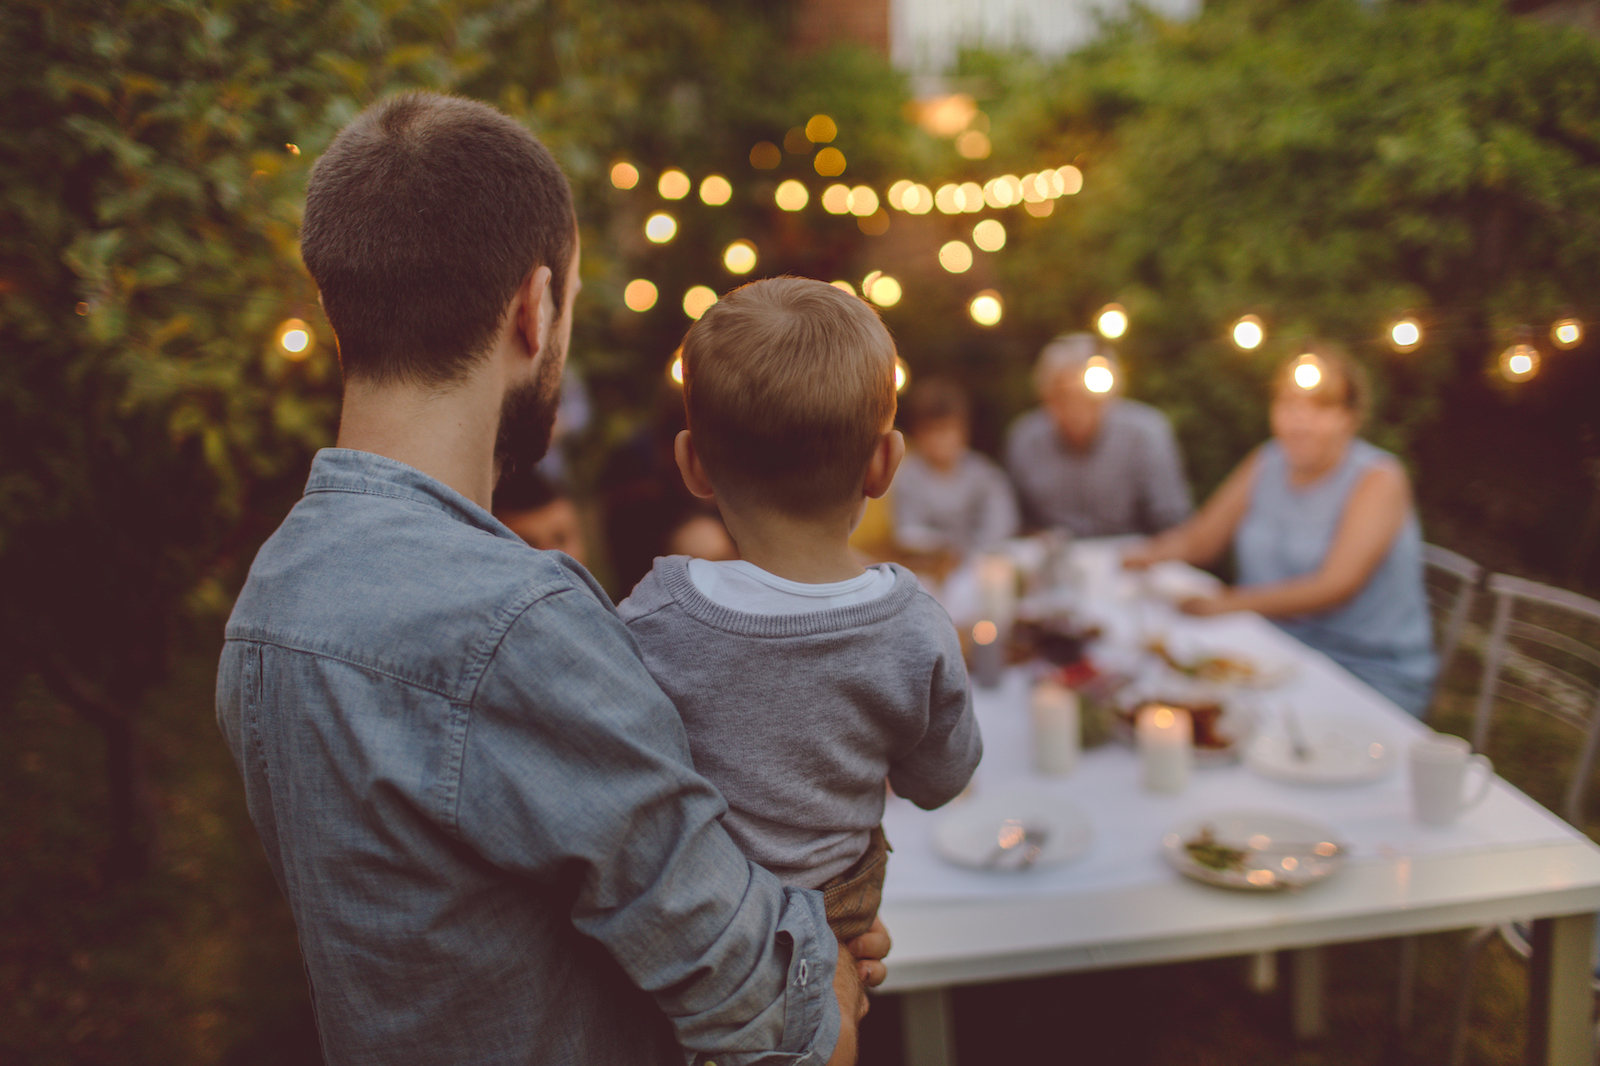 A man holding a child looking at a table with family around it.